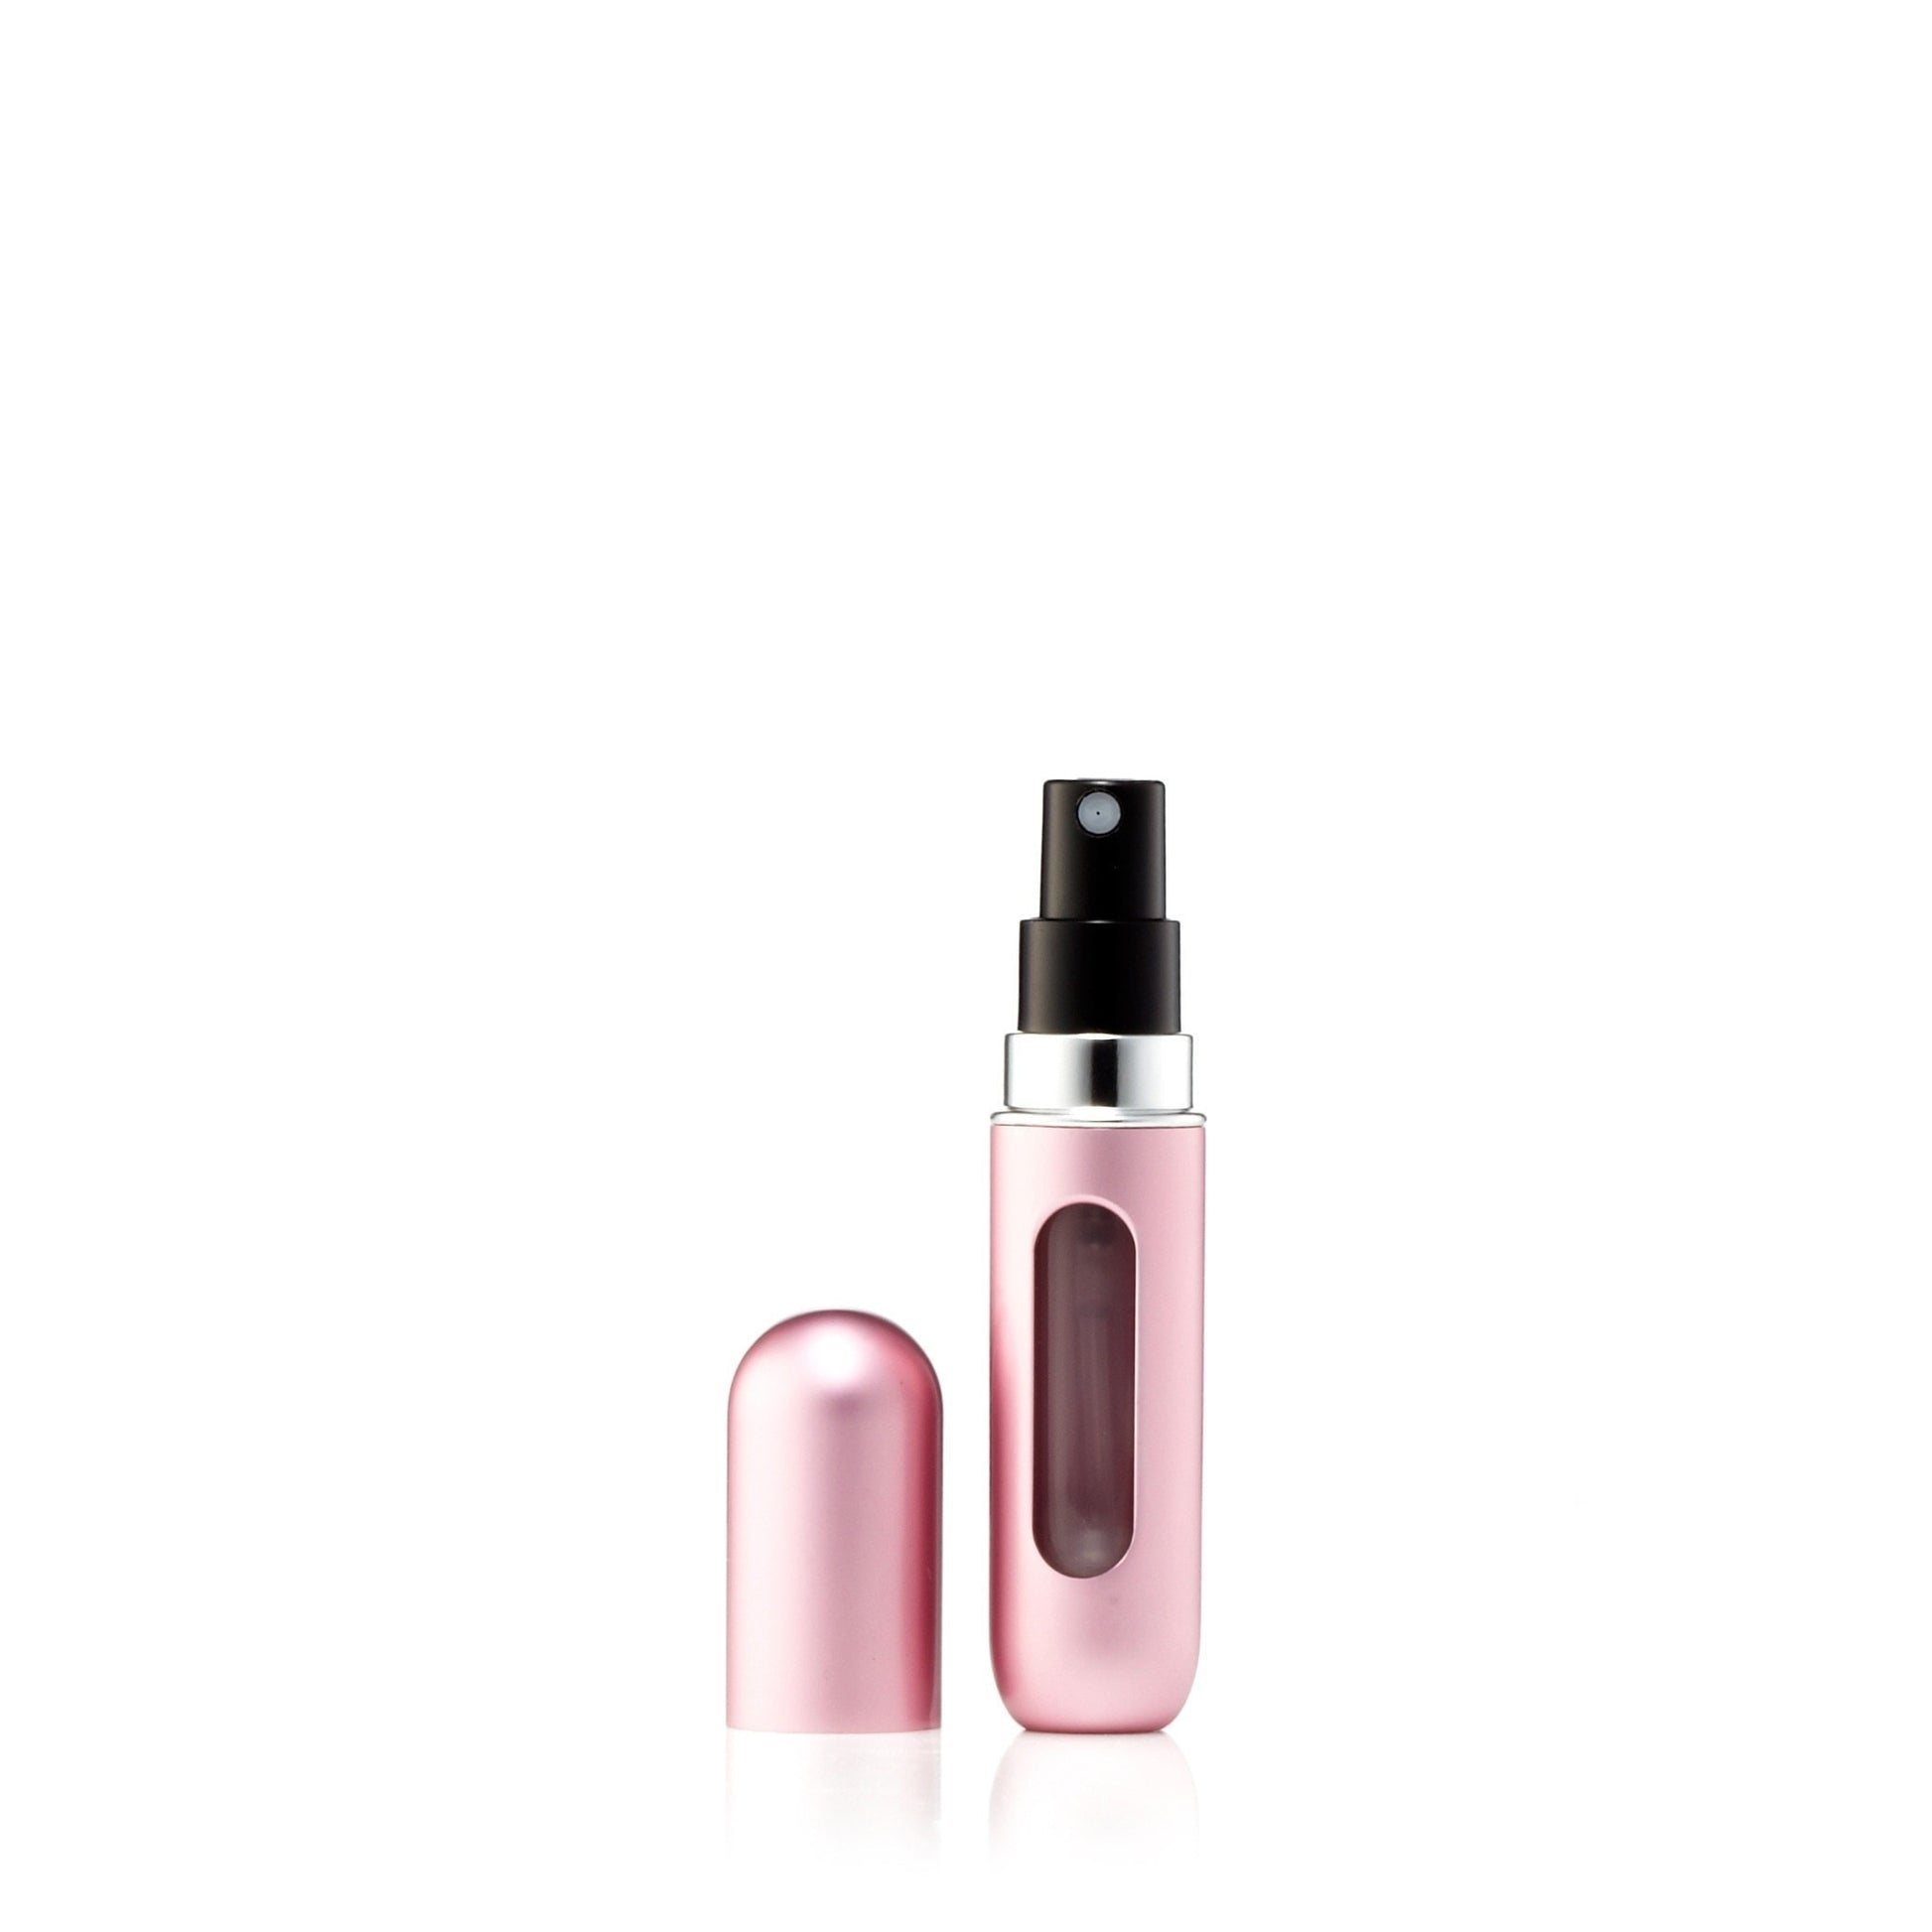 Travalo Refillable Fragrance Spray Atomizer Atomizer Unisex Accessories Pink Click to open in modal